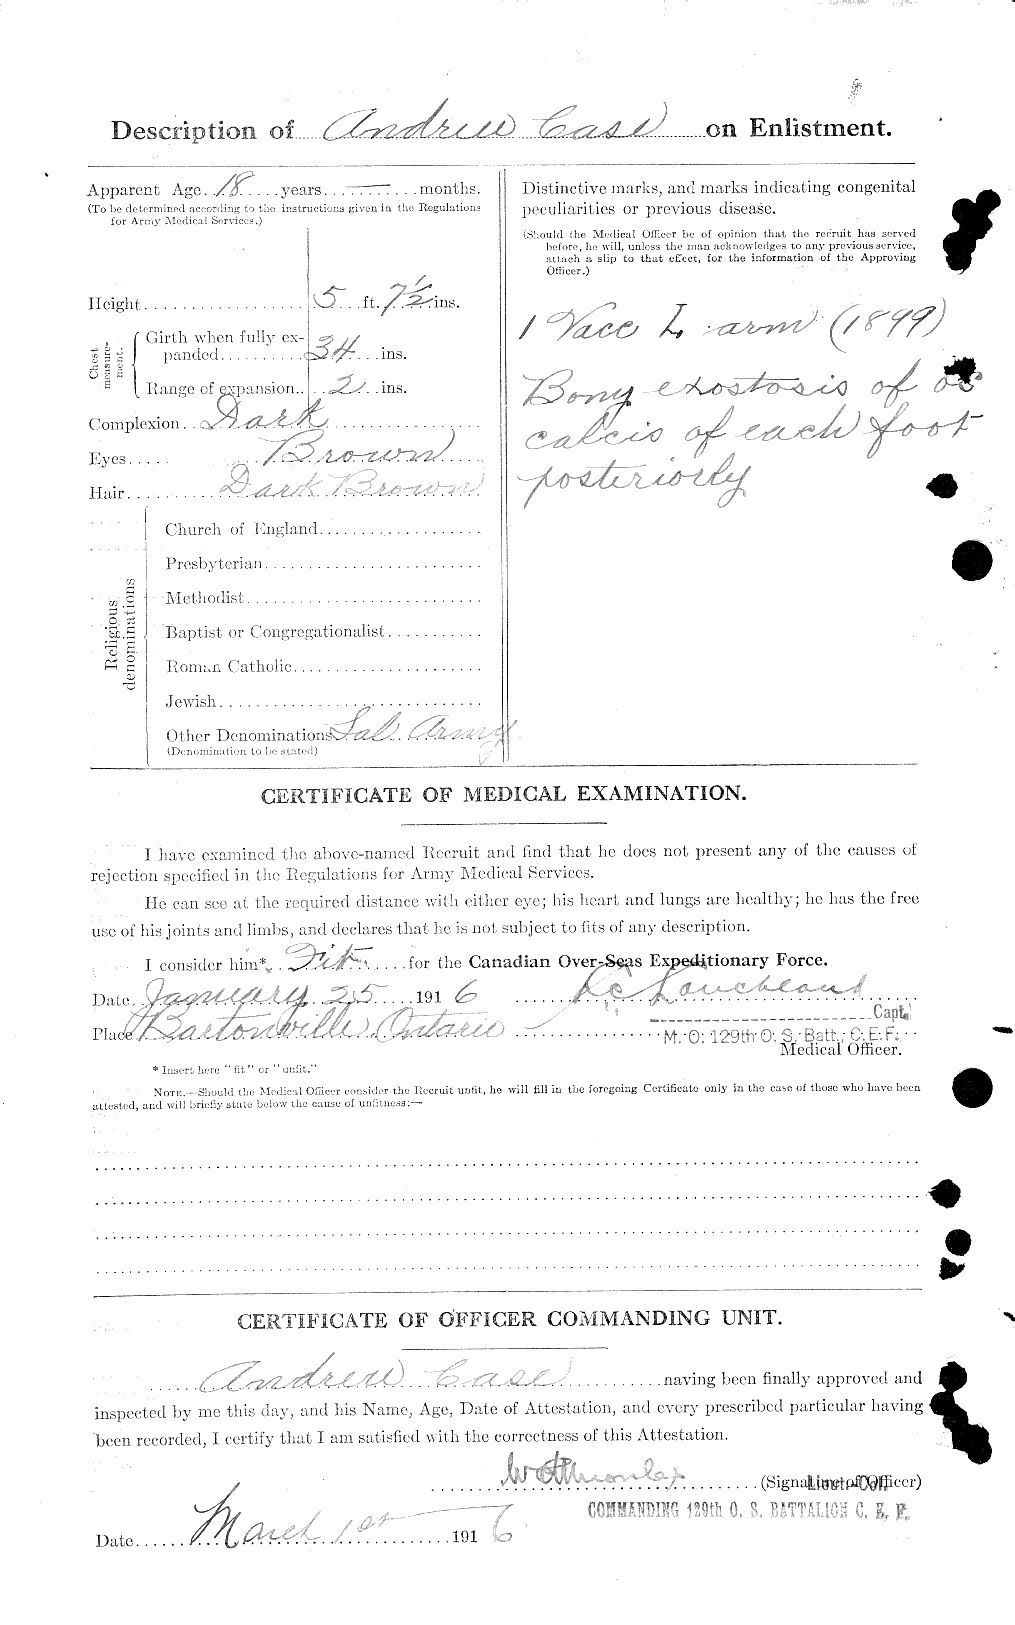 Personnel Records of the First World War - CEF 011713b